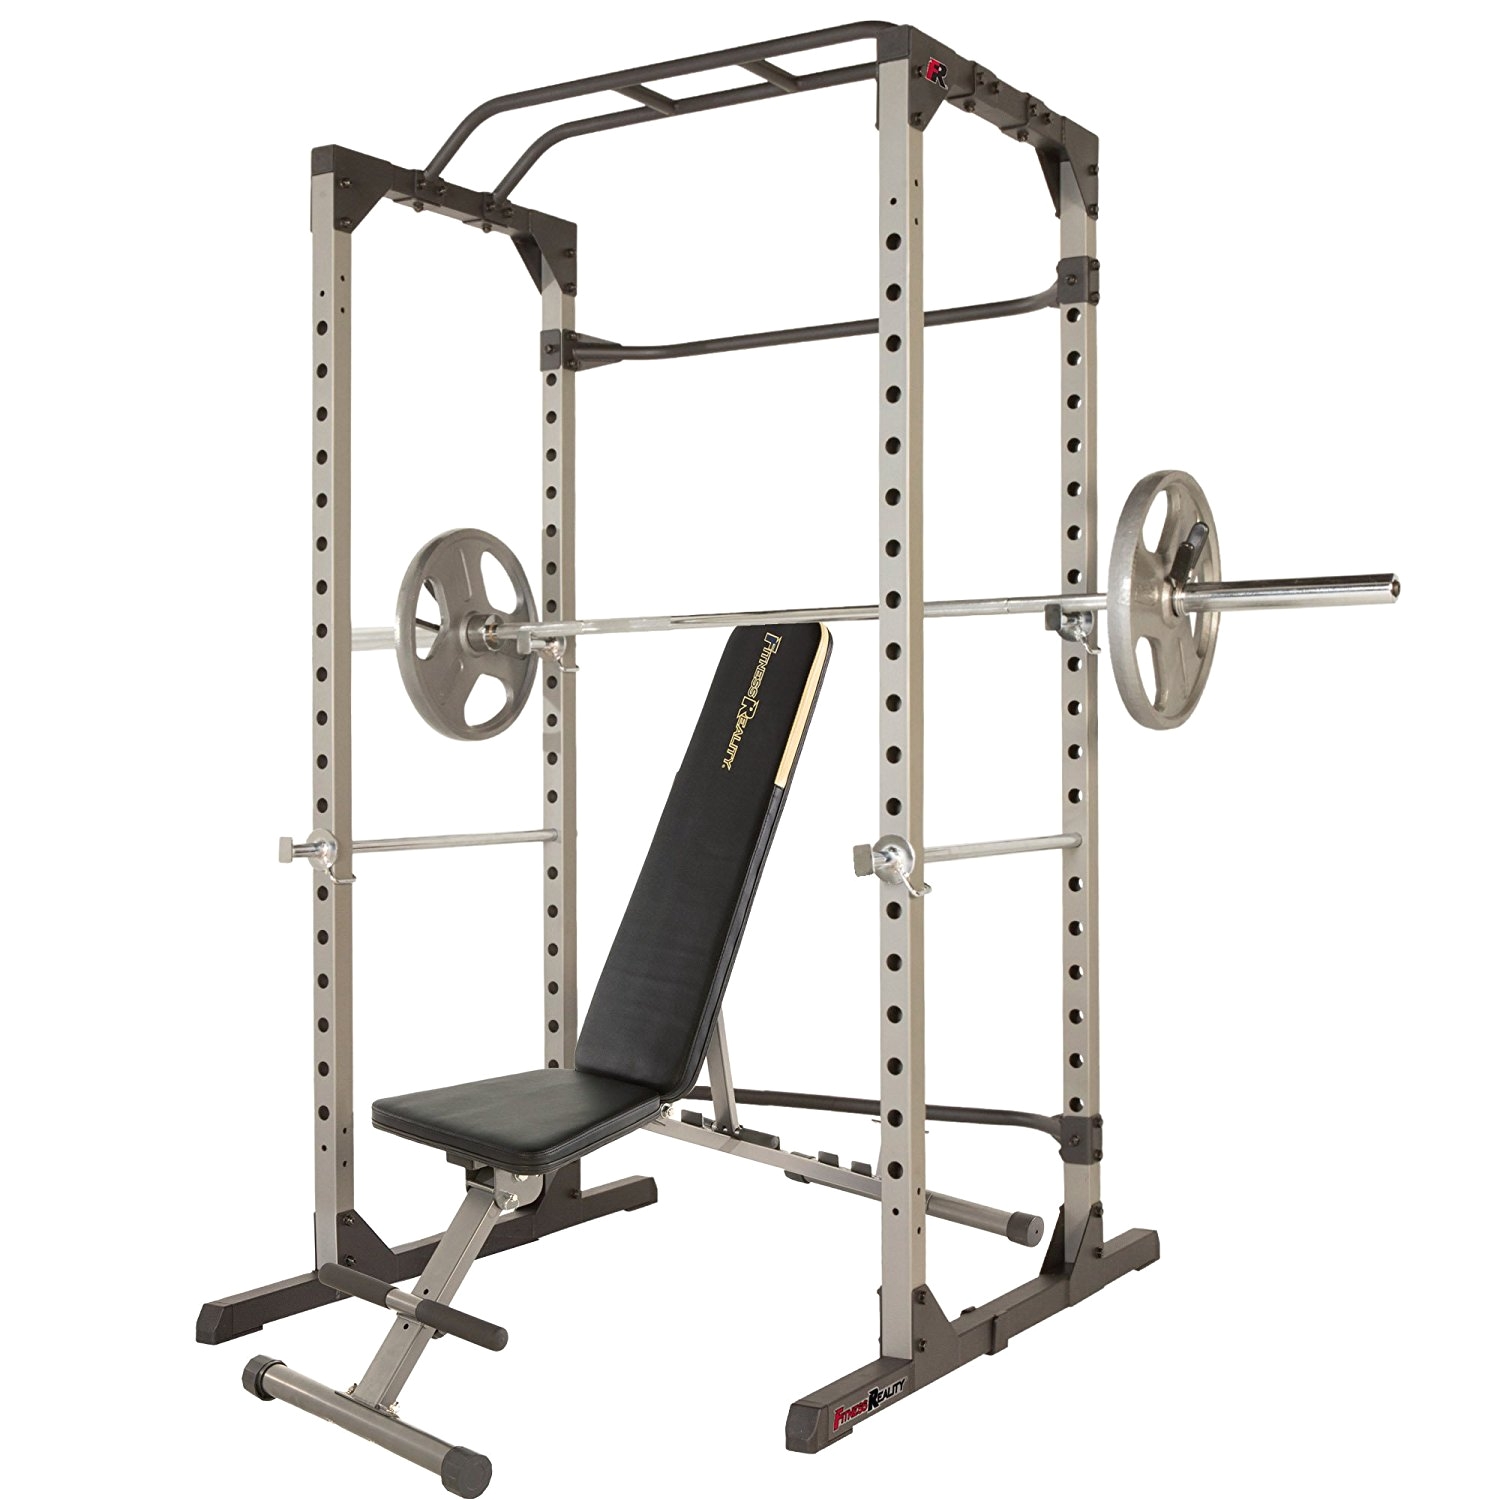 amazon com fitness reality 810xlt super max power cage with the 800 lb capacity super max 1000 weight bench combo sports outdoors